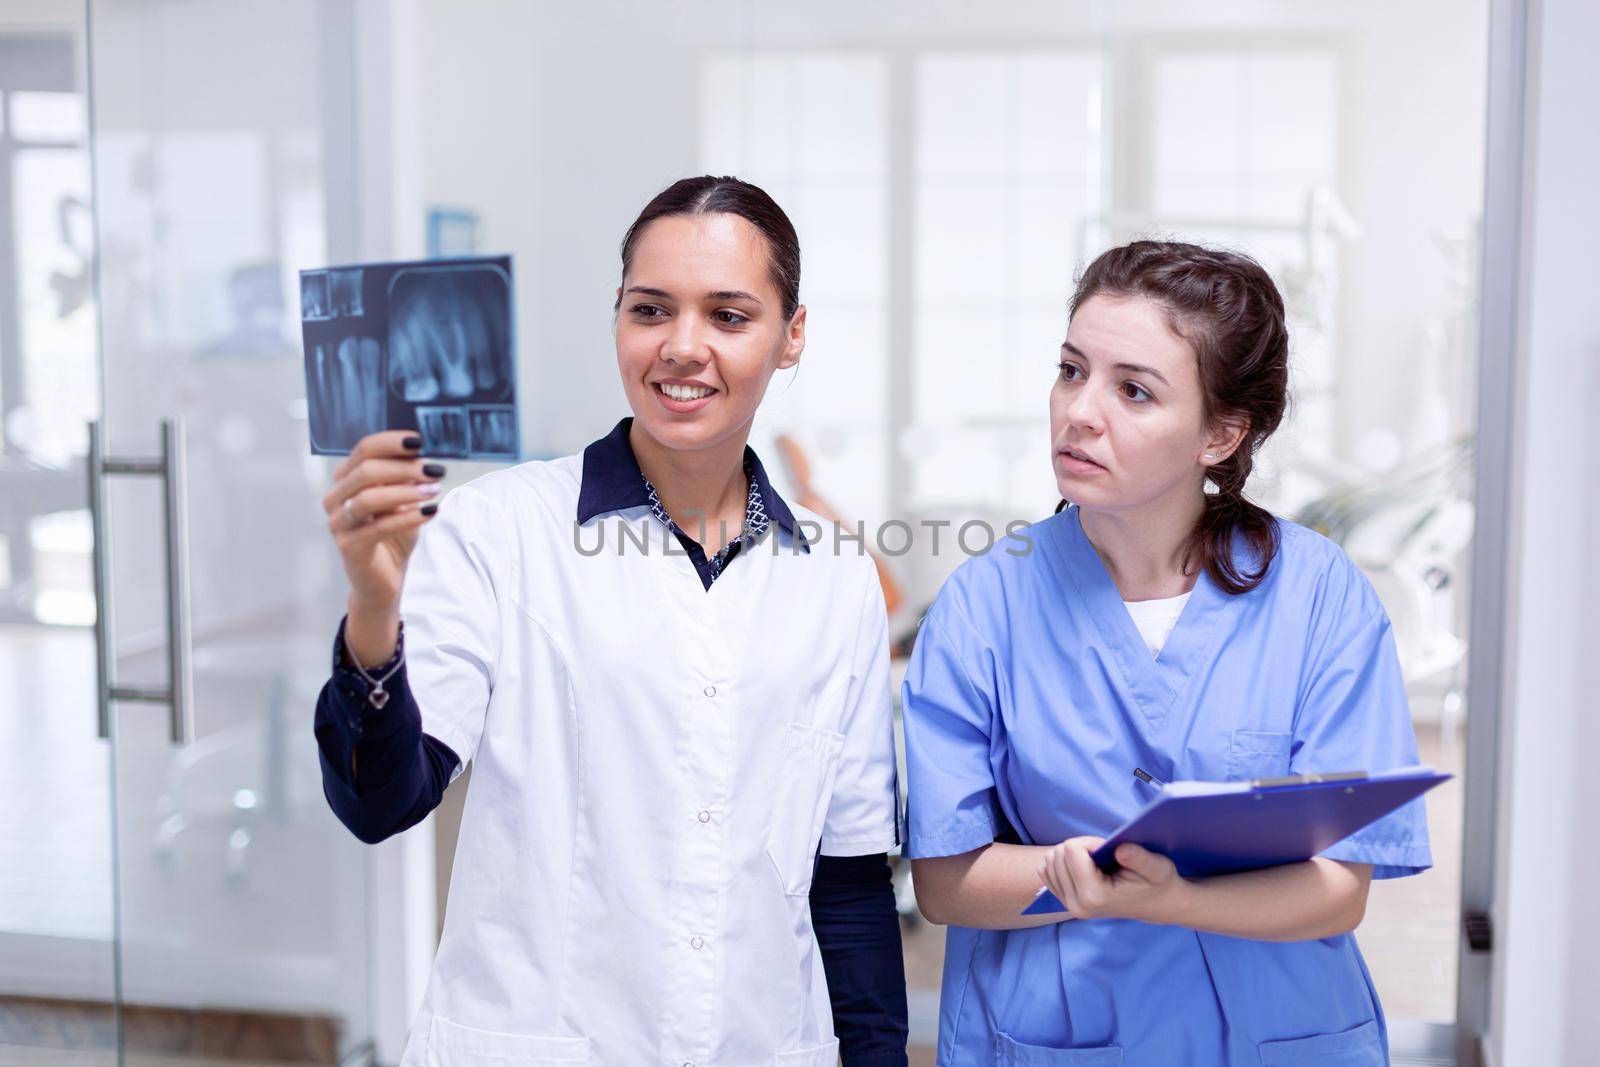 Dentist doctor holding teeth x-ray and nurse taking notes by DCStudio